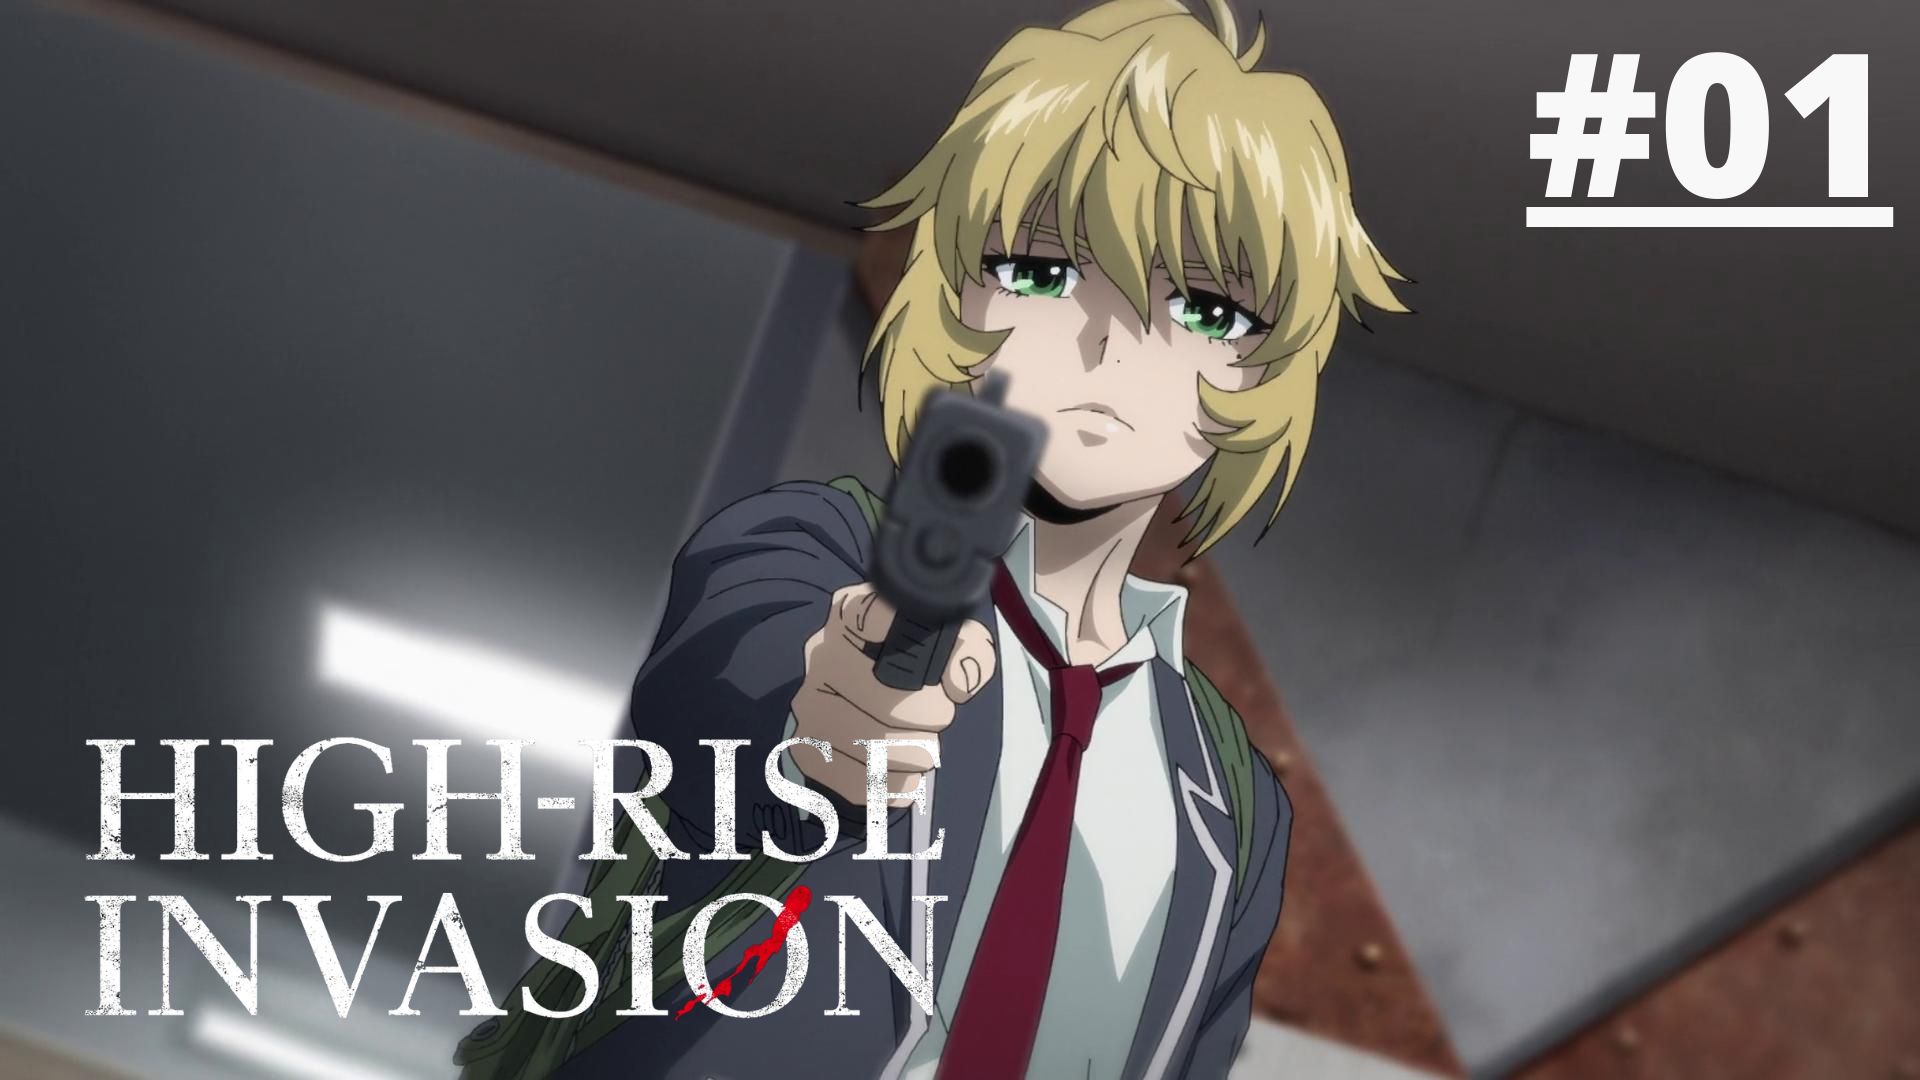 What is your review on High-rise Invasion anime (Netflix)? - Quora